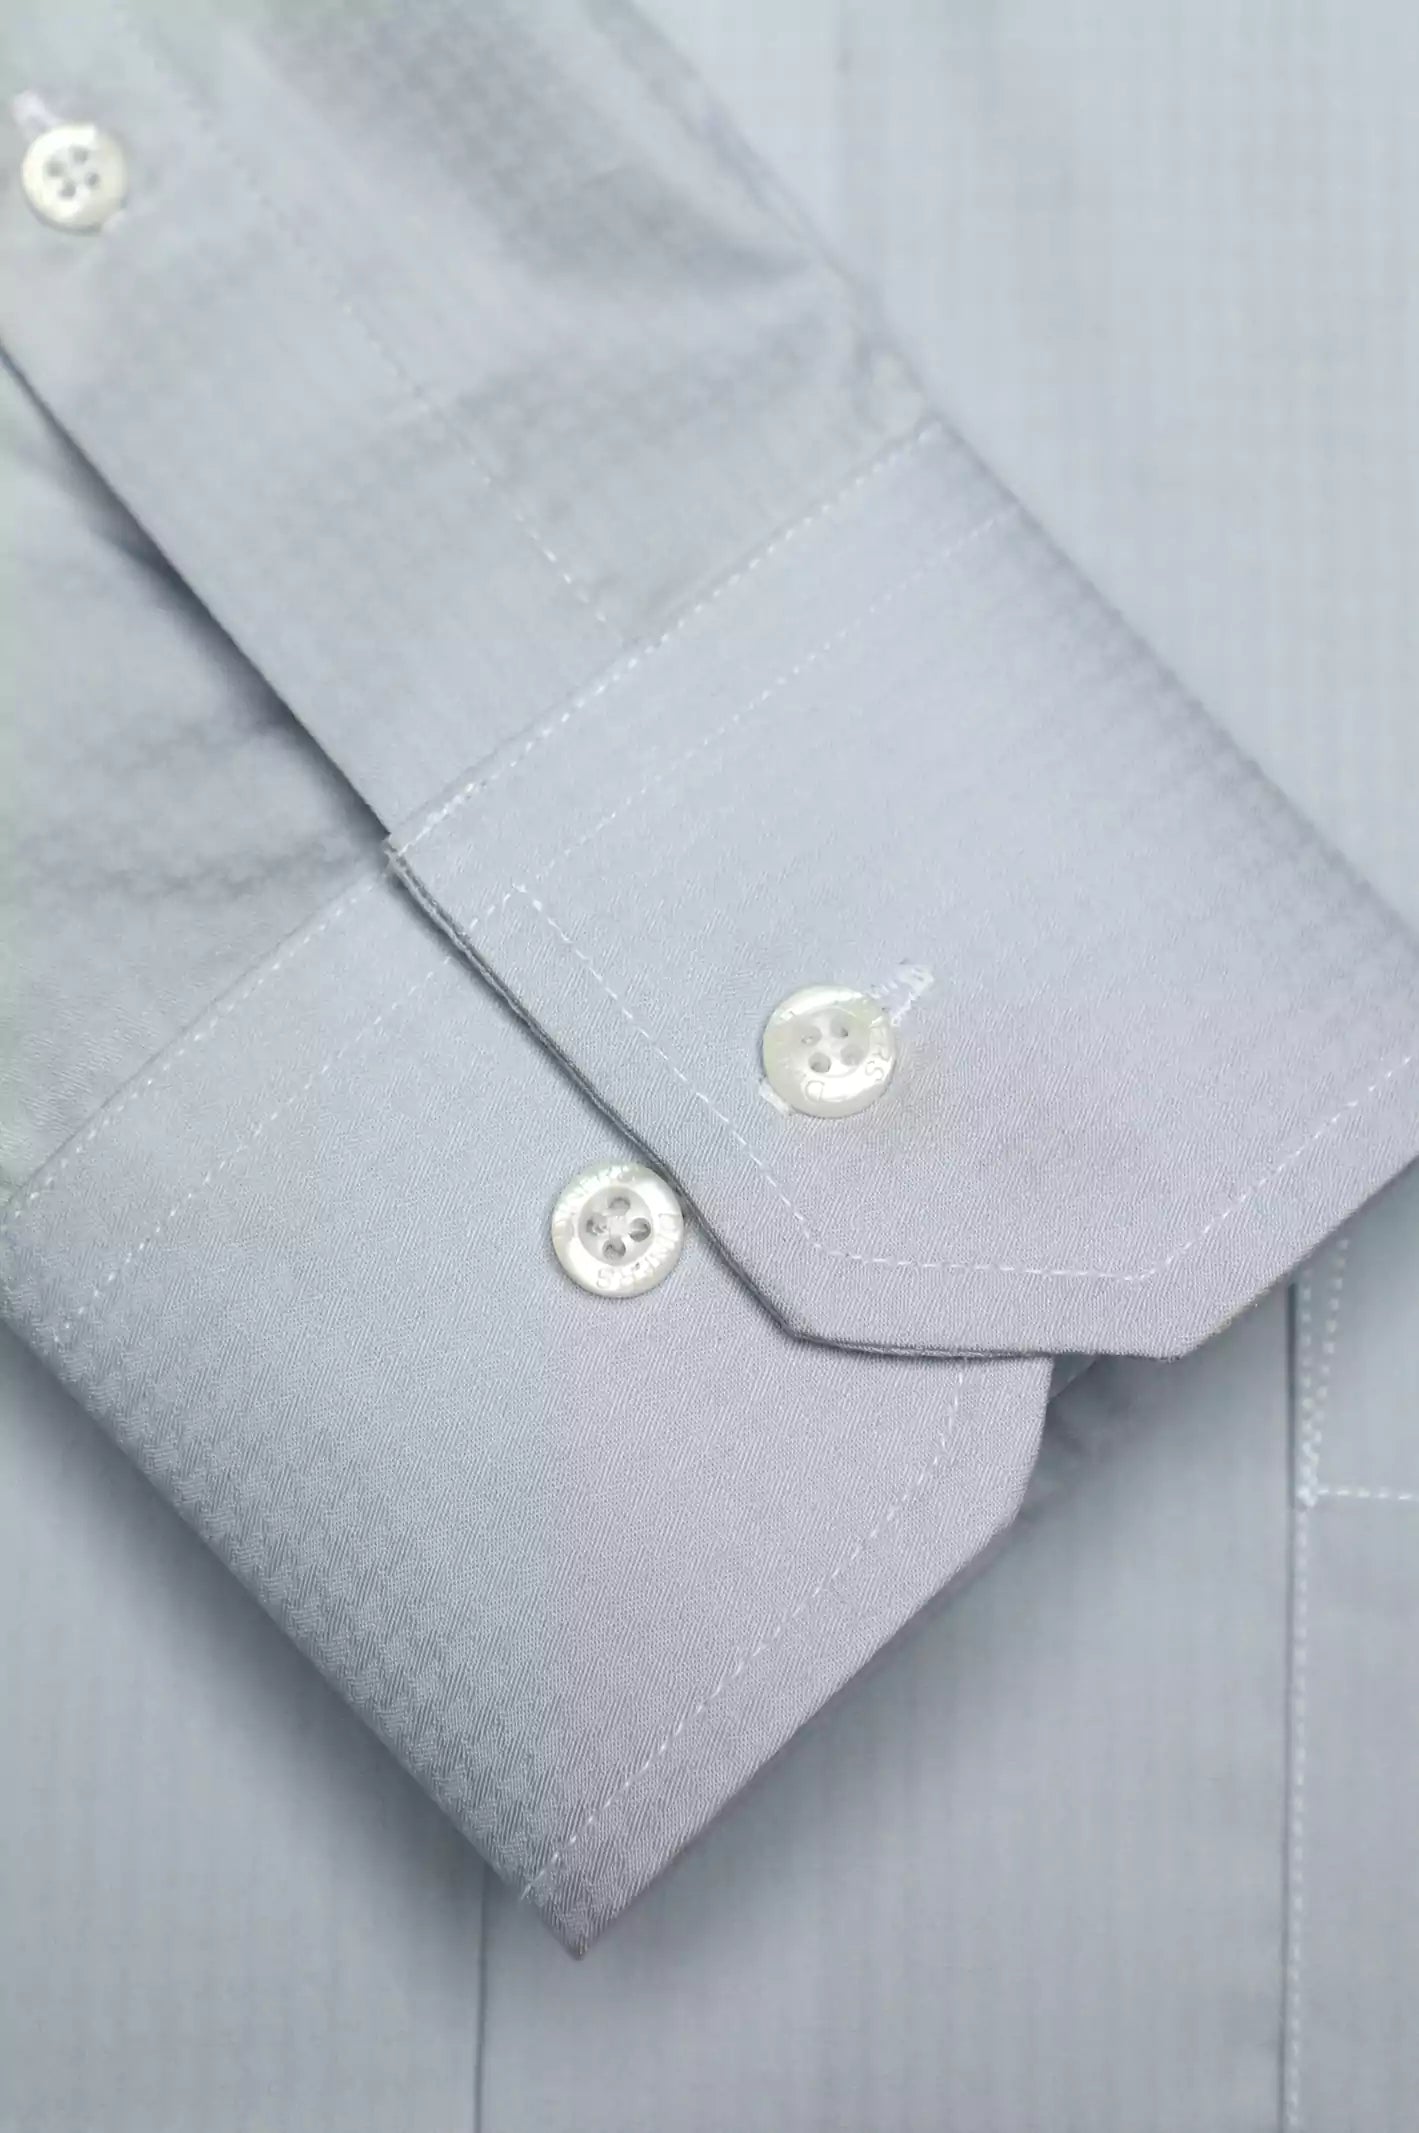 Grey Dobby Self Formal Shirt From Diners